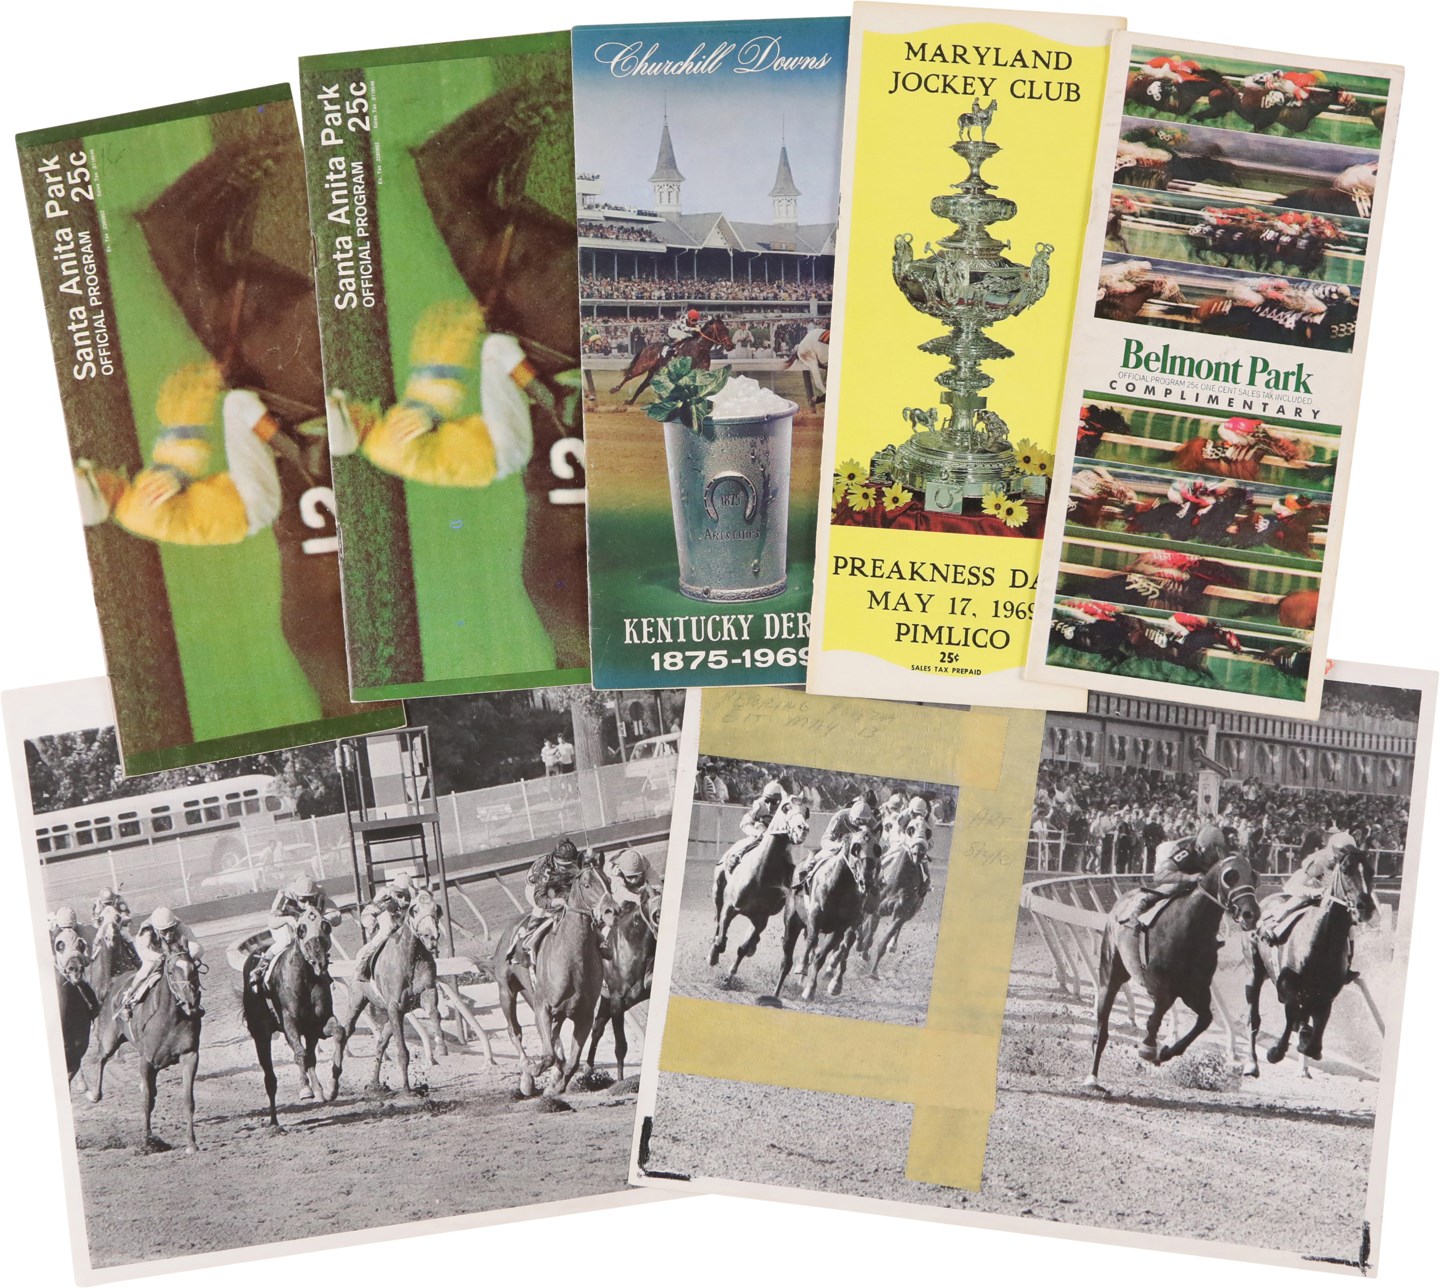 Hall of Fame Racehorse Majestic Prince Programs and Photos (32)